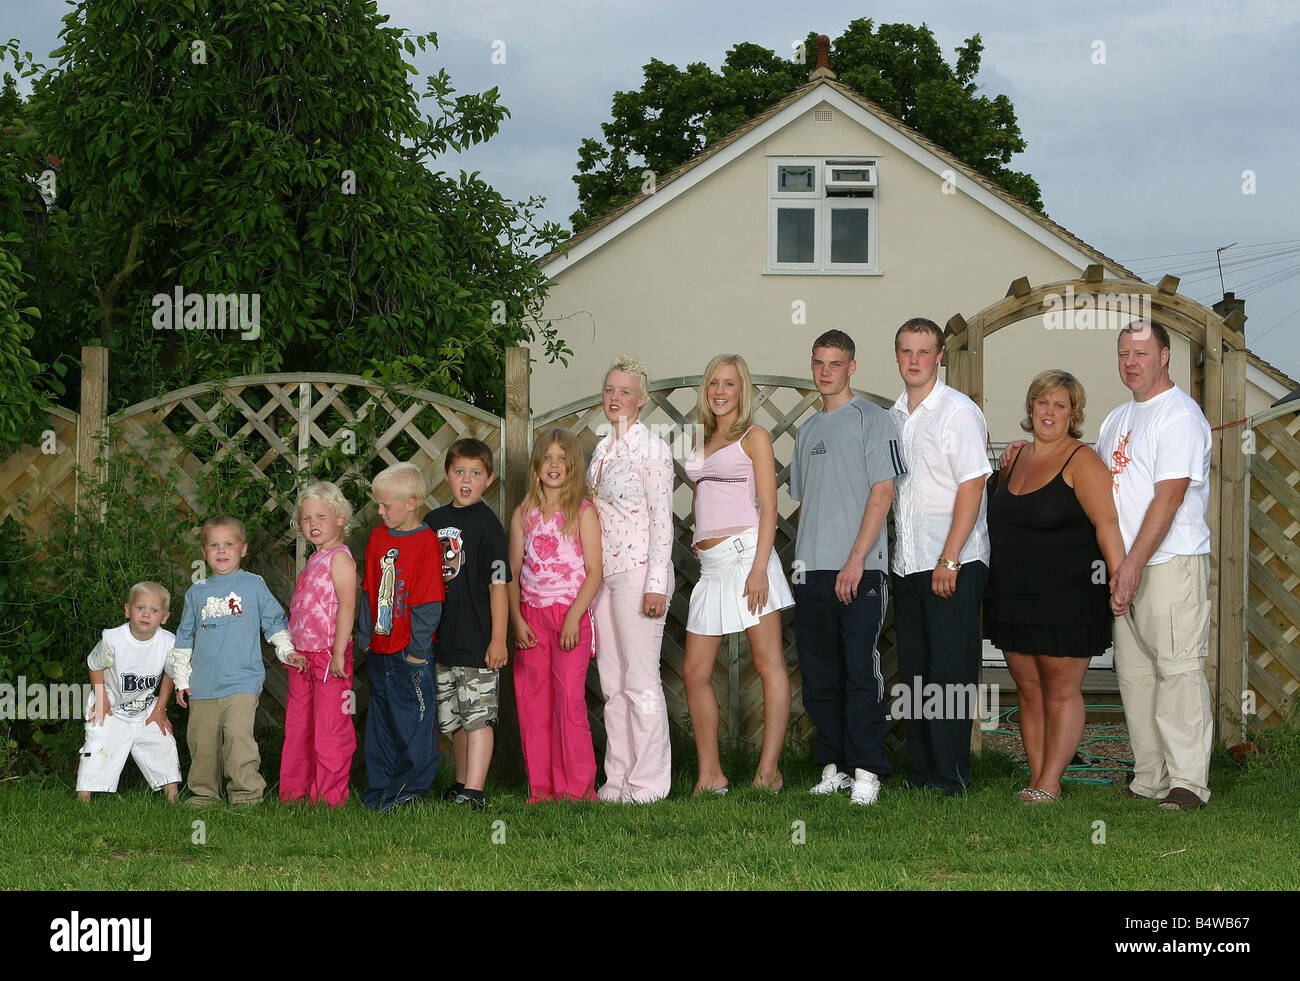 The Brown Family with 11 children June 2004 11 kids From Grays in Essex left to right harvey 3 mishka 4 alanis 6 william 7 thomas 9 leann 9 emma louise 16 nikki 21 dave 22 james 18 caroline mum 44 and dave dad 46 from grays in essex Parents Caroline Brown and Dave Brown Stock Photo